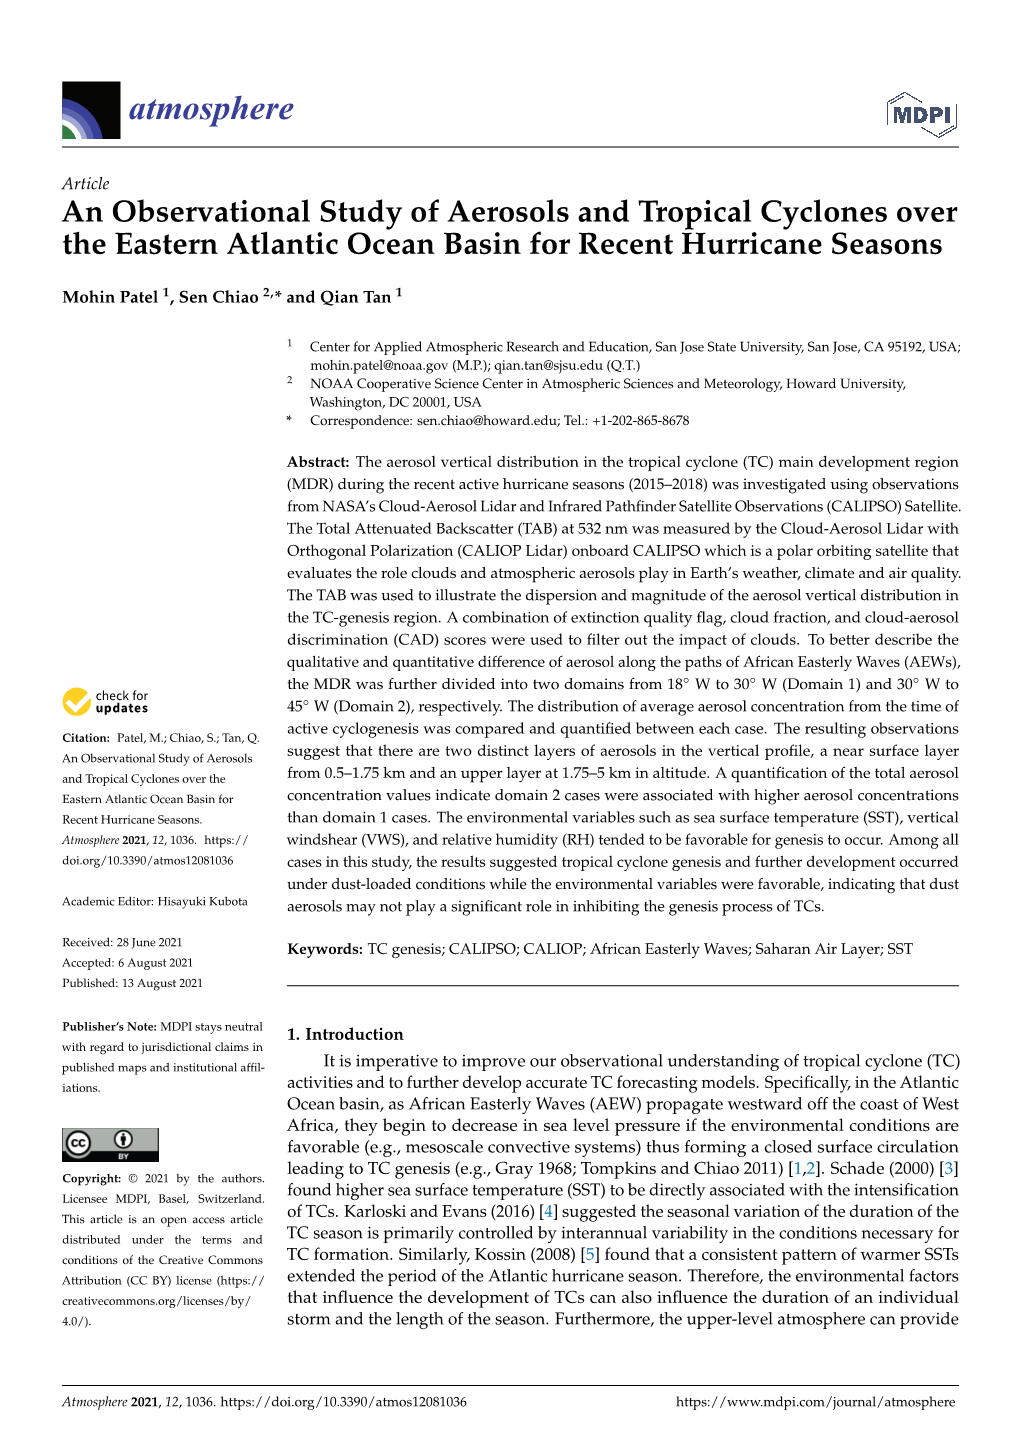 An Observational Study of Aerosols and Tropical Cyclones Over the Eastern Atlantic Ocean Basin for Recent Hurricane Seasons